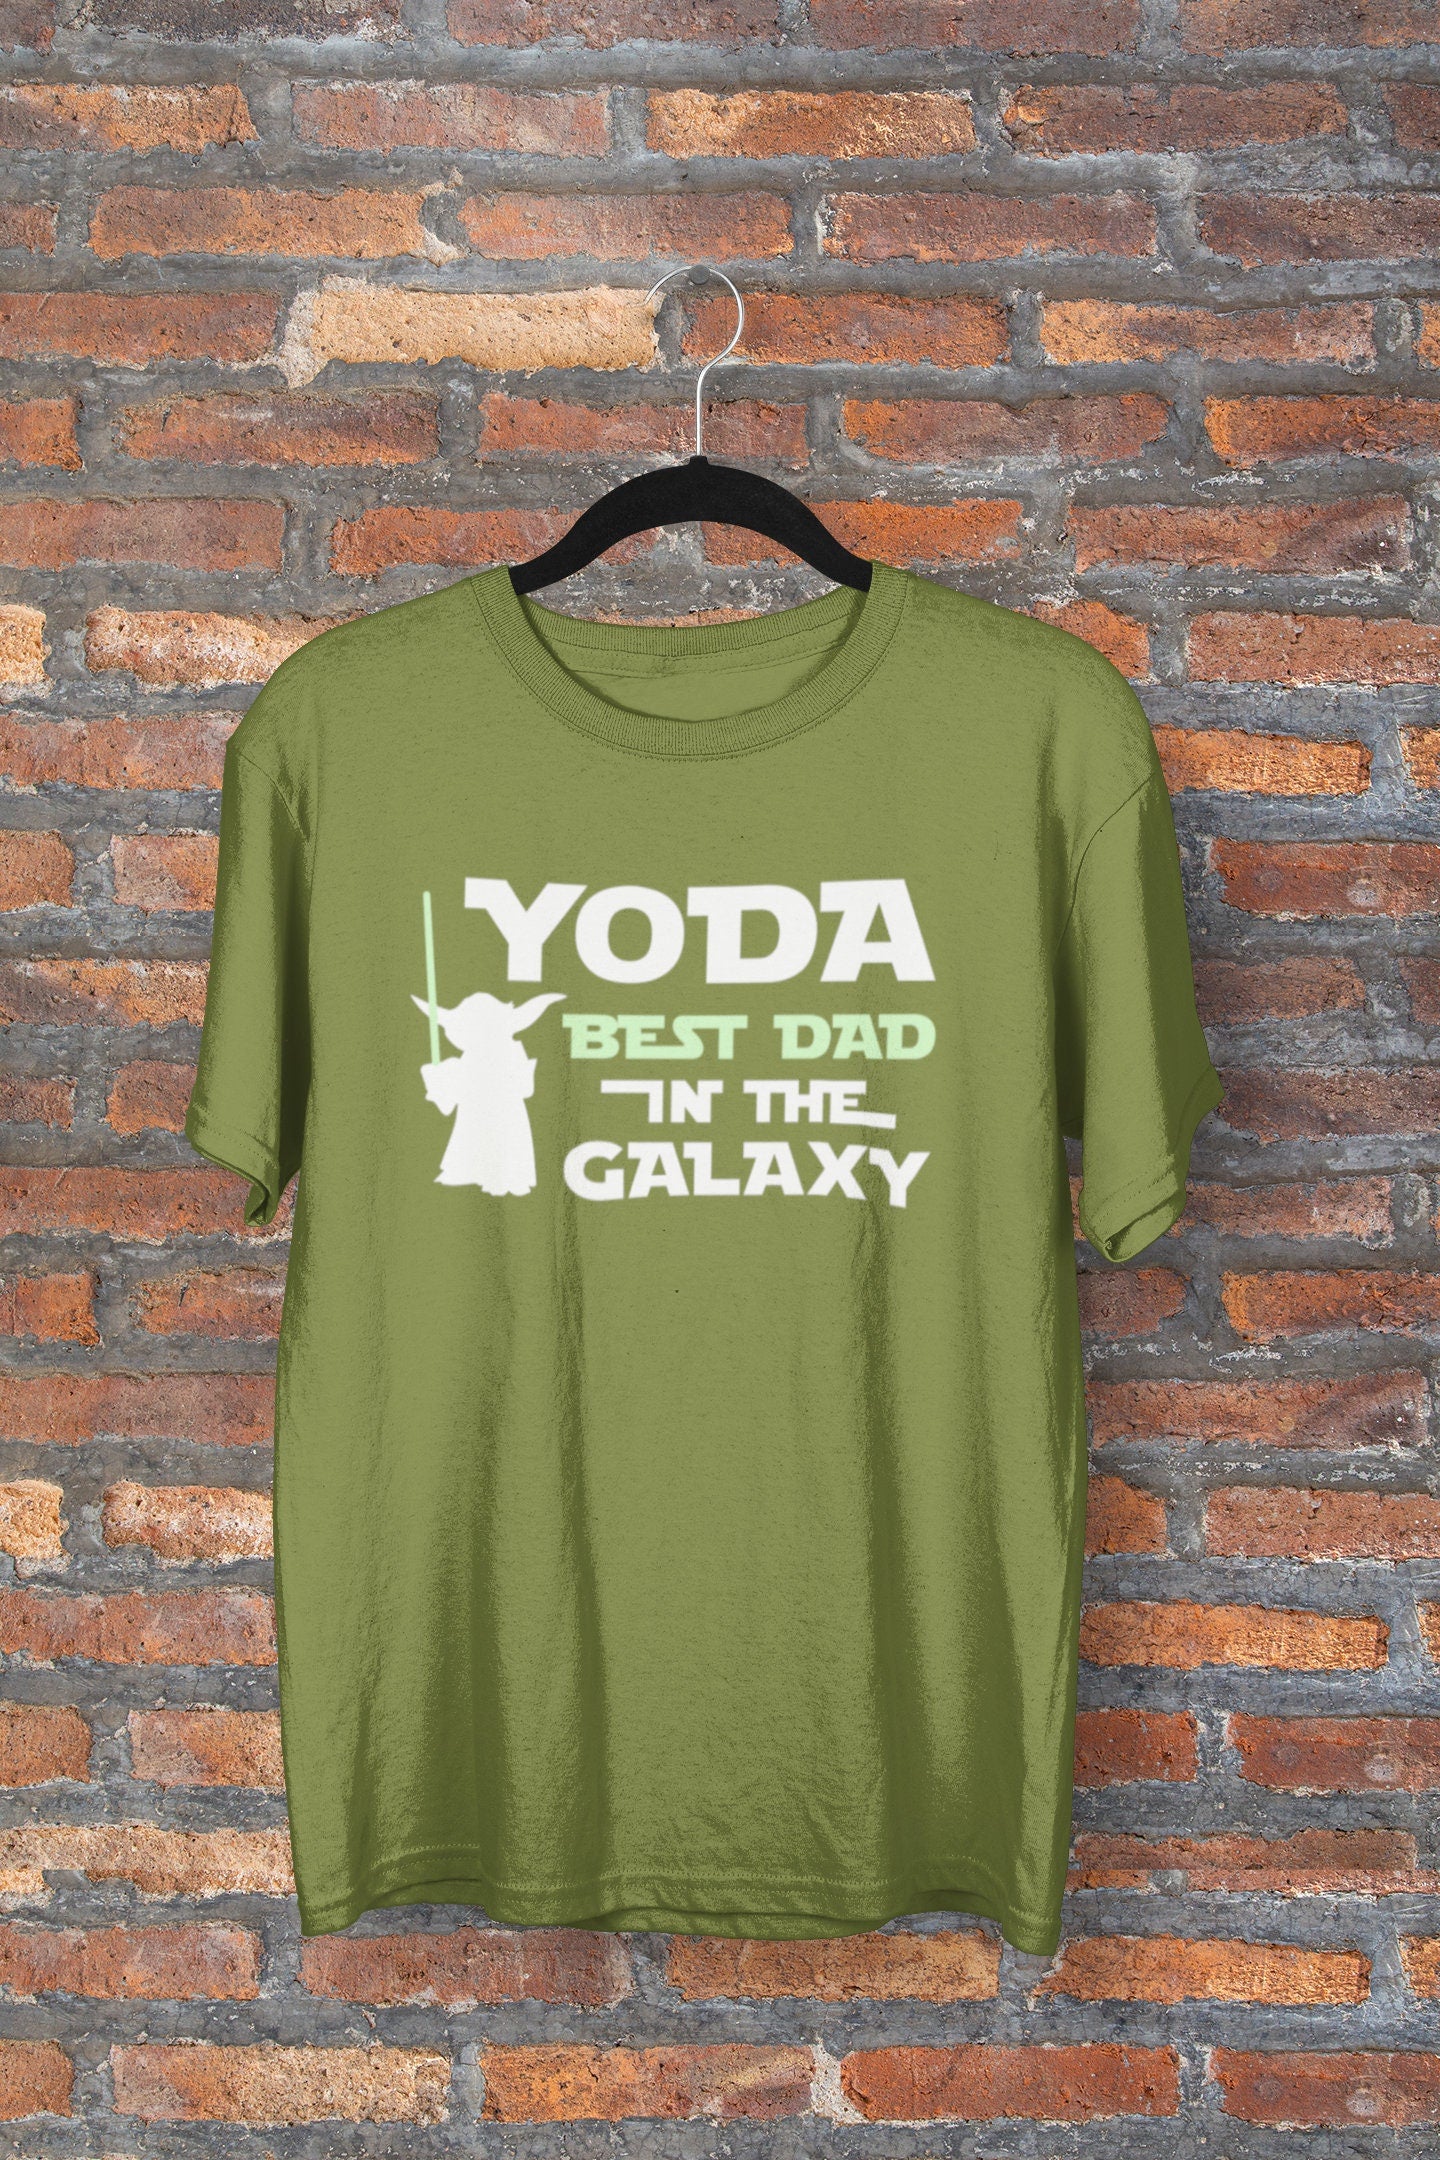 Yoda Best Dad in the Galaxy - Star Wars themed Father's Day shirt